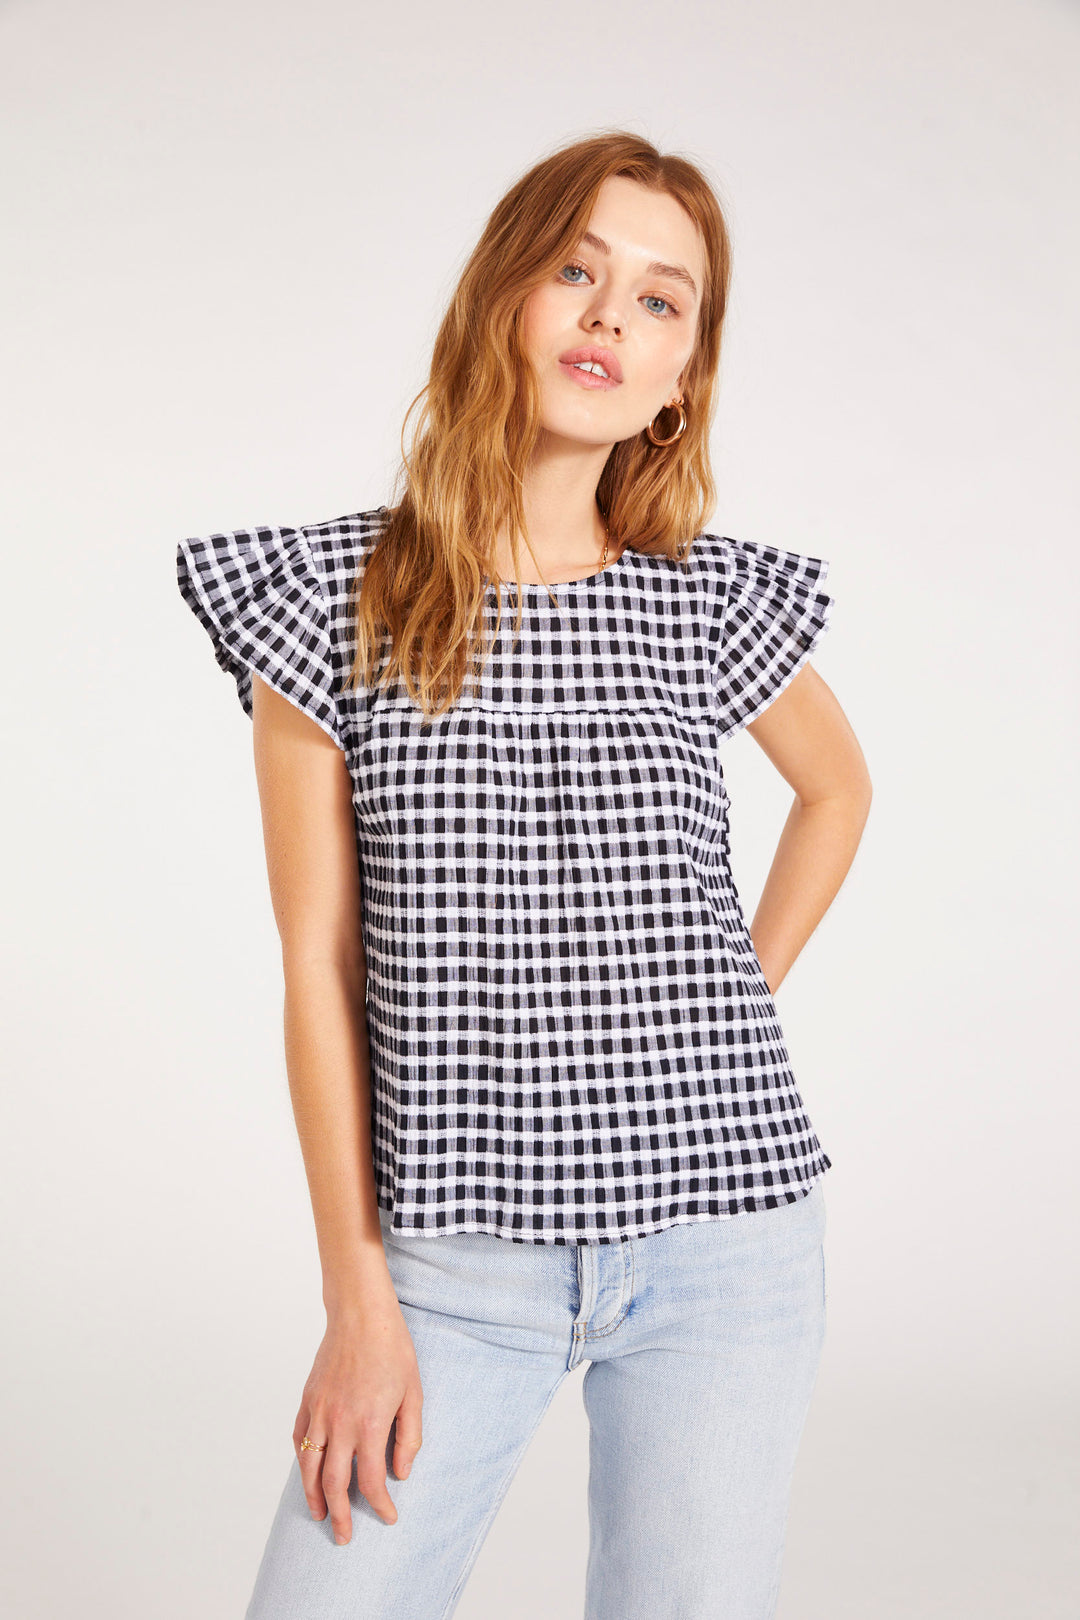 CHECK MATE TOP - Kingfisher Road - Online Boutique